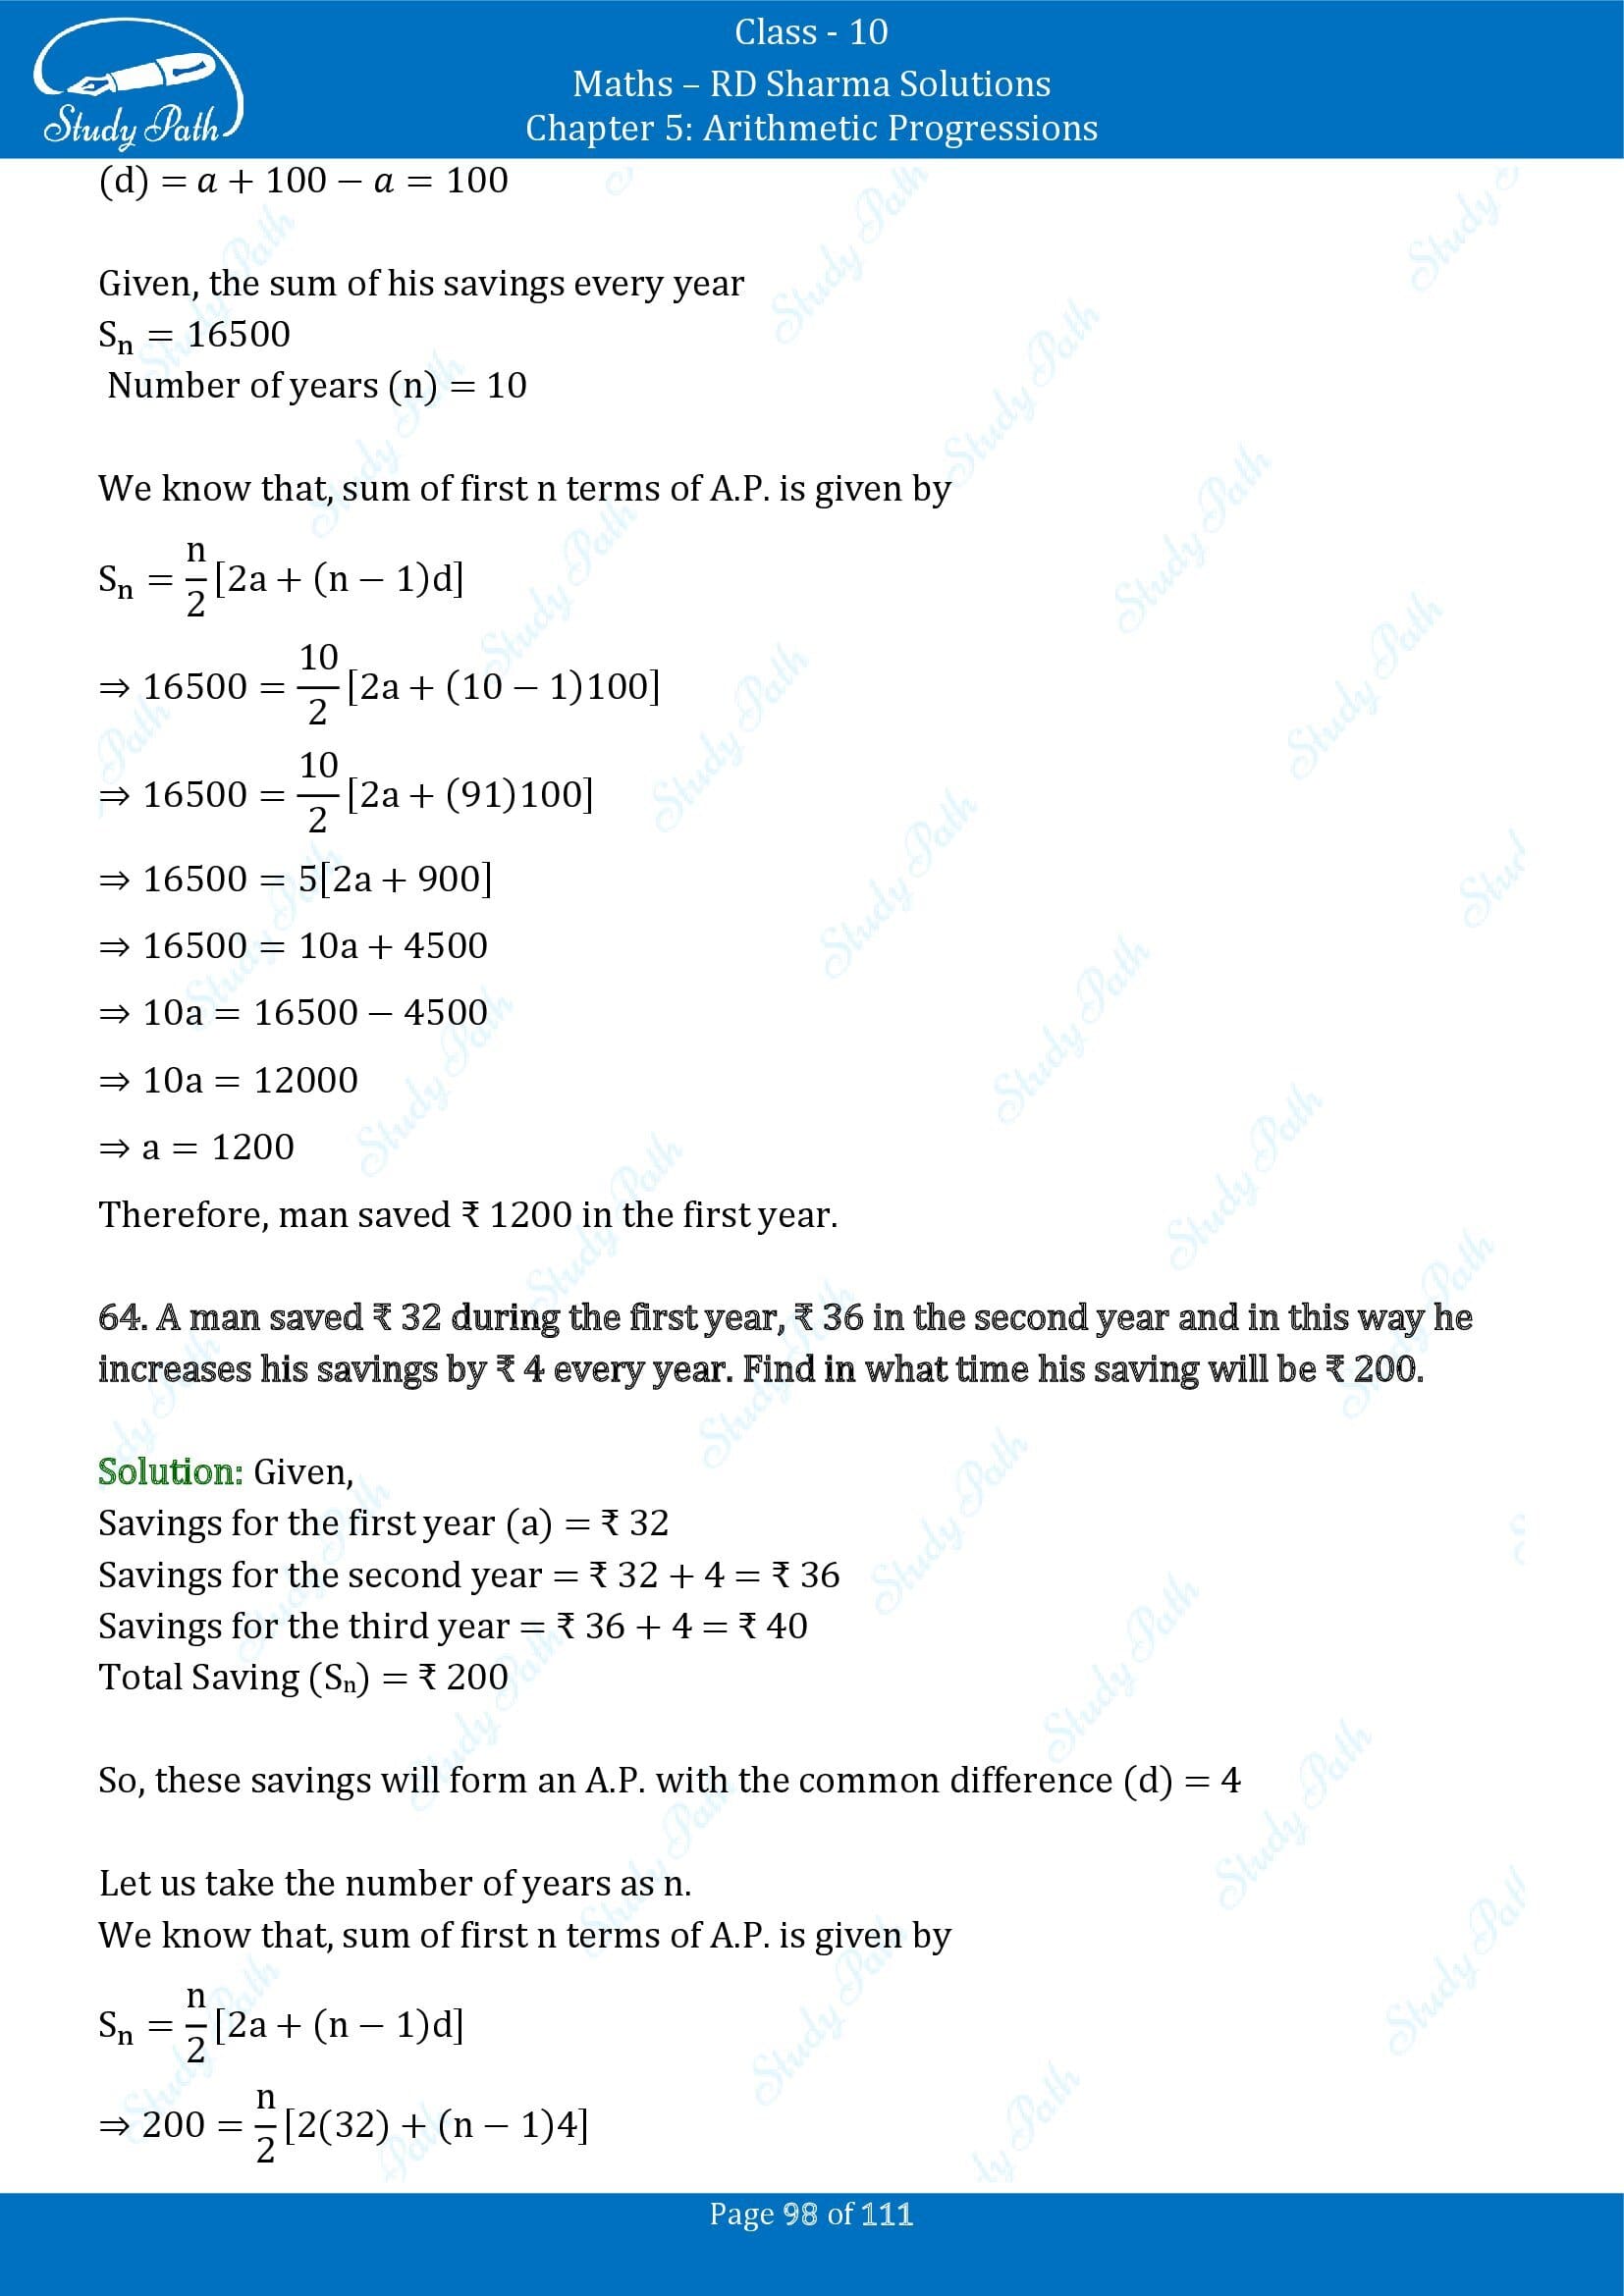 RD Sharma Solutions Class 10 Chapter 5 Arithmetic Progressions Exercise 5.6 00098